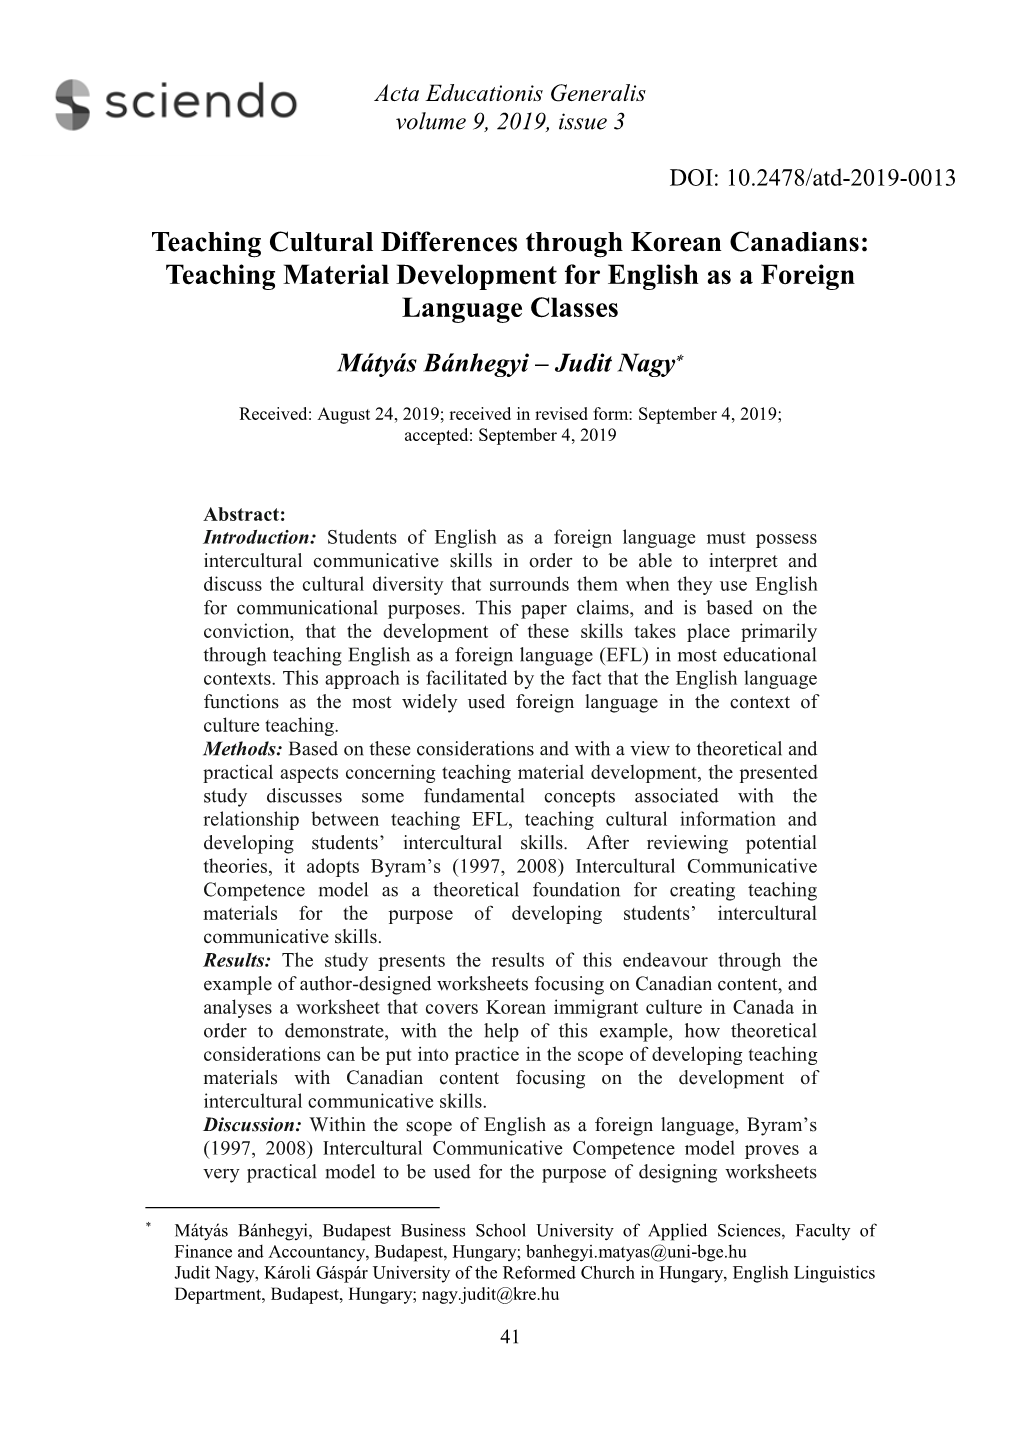 Teaching Cultural Differences Through Korean Canadians: Teaching Material Development for English As a Foreign Language Classes